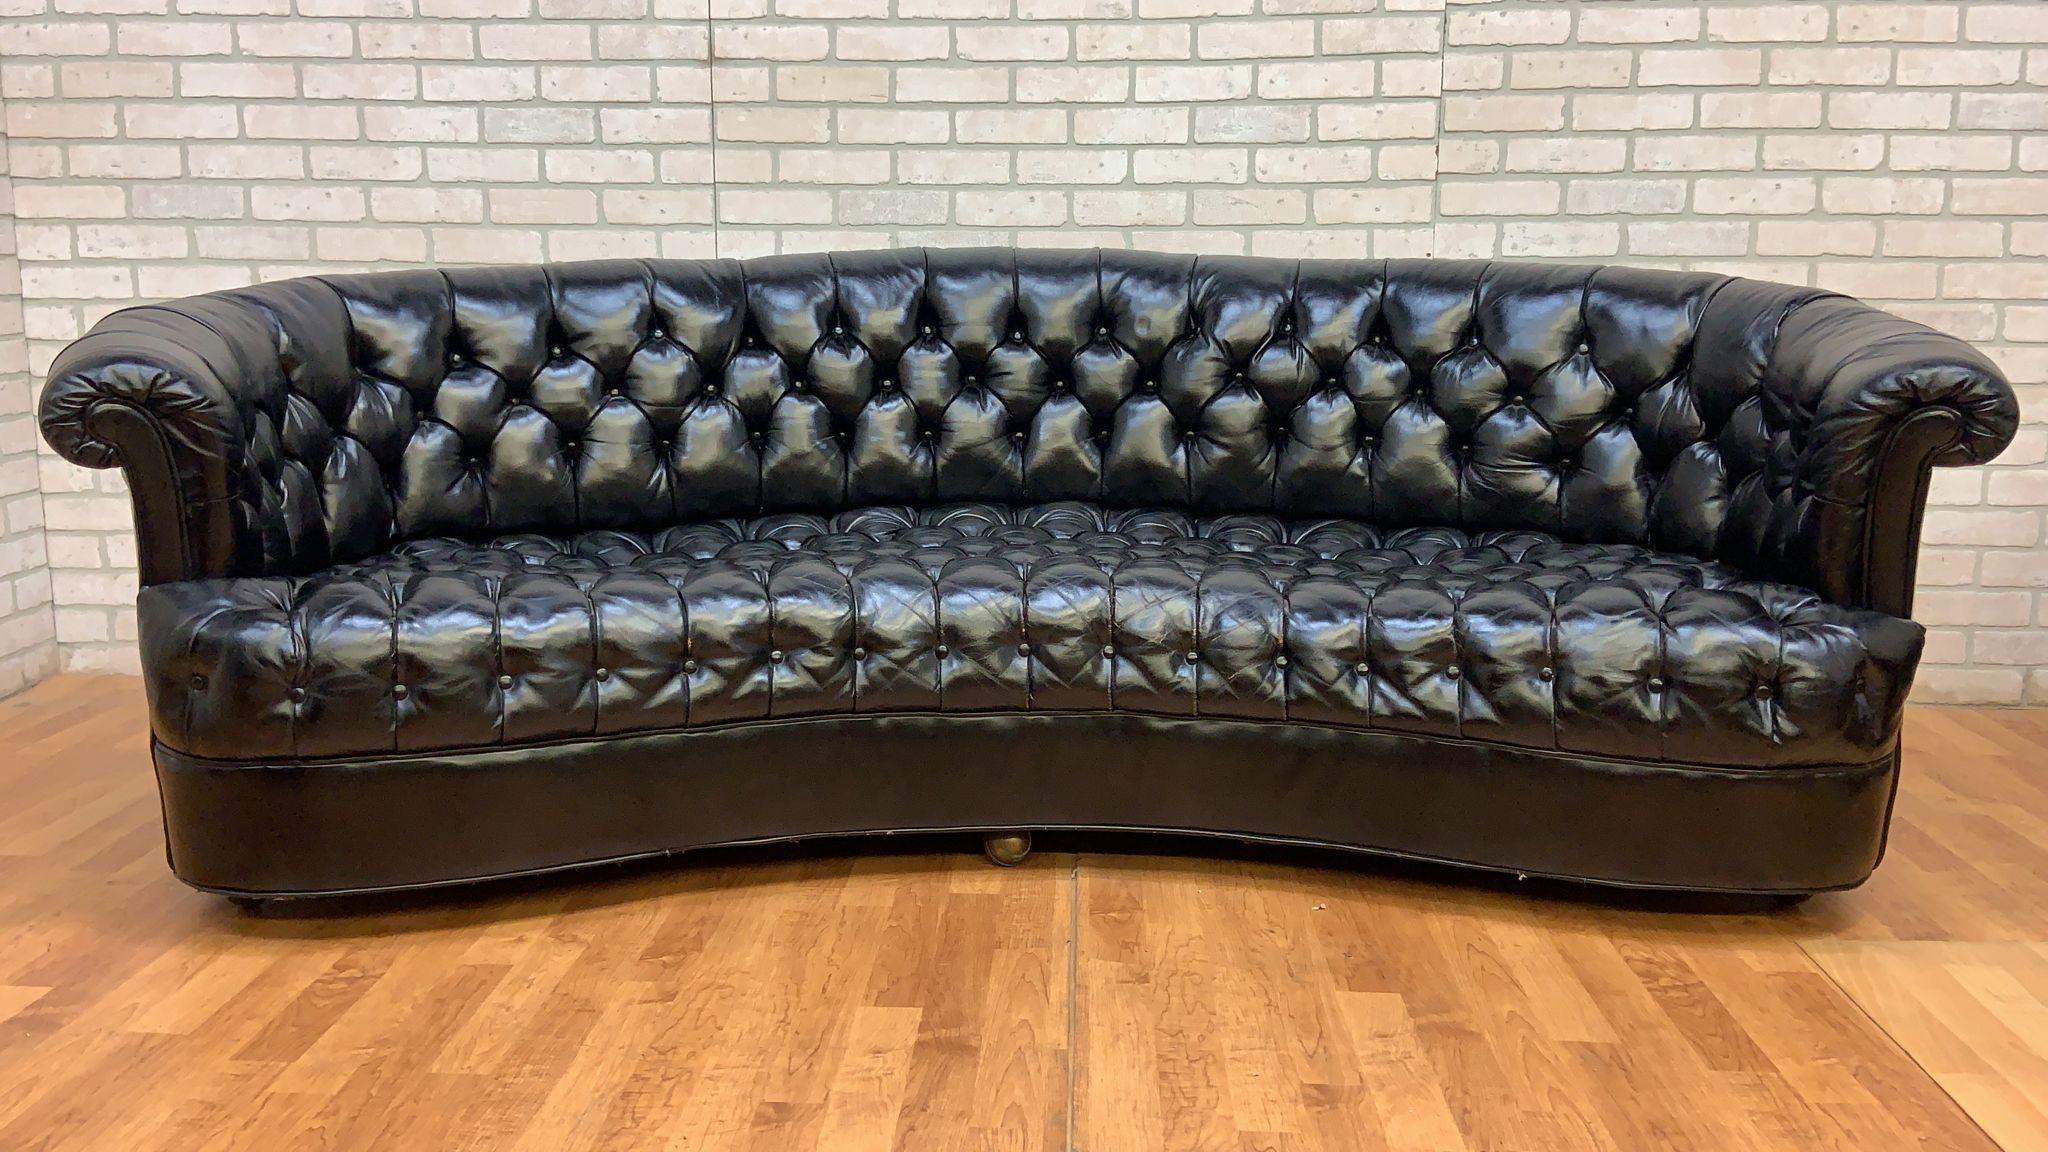 Vintage Chesterfield Style Curved Back Black Leatherette Sofa

This amazing and sturdy 1950’s Curved Back Black Leatherette Chesterfield Style Sofa will be a speaking piece in any room that it is placed. The sofa has been tufted in black leatherette